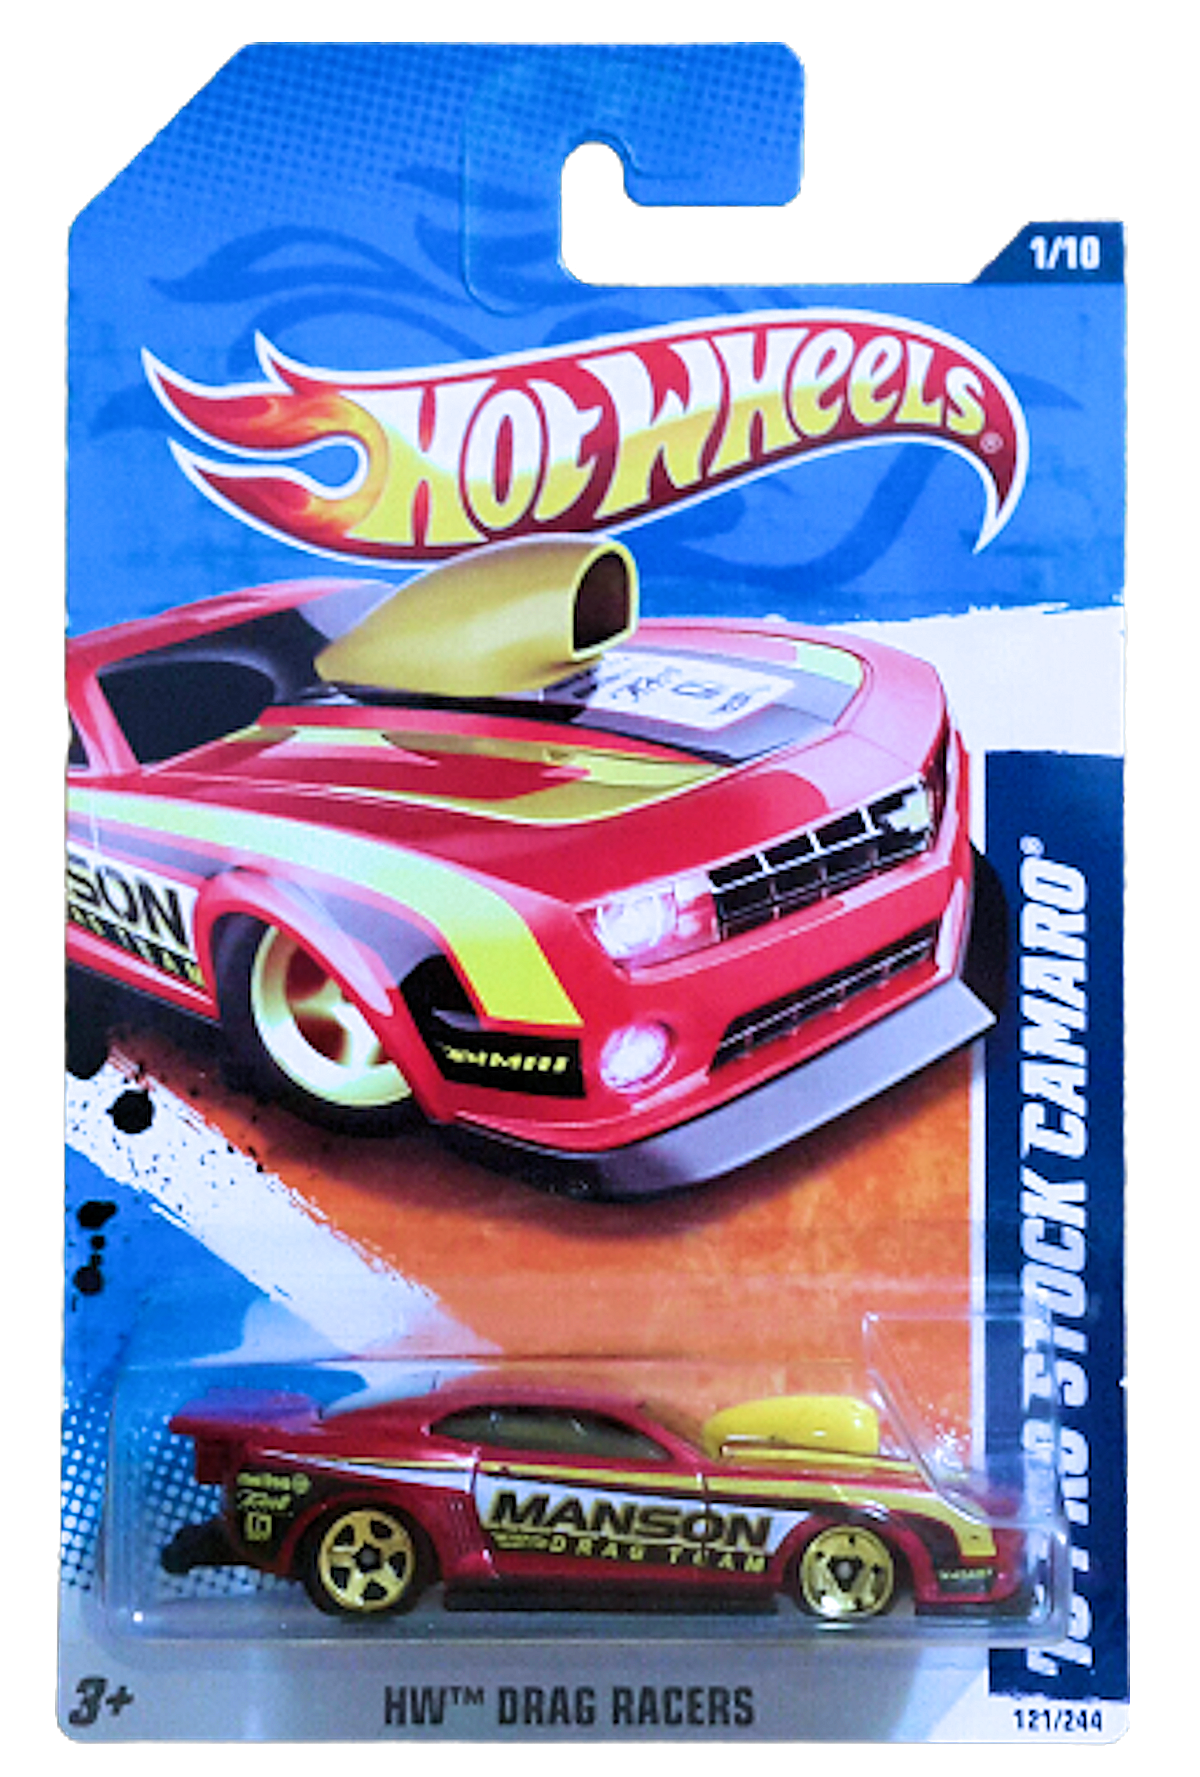 Hot Wheels 2011 - Collector # 121/244 - HW Drag Racers 1/10 - '10 Pro Stock Camaro - Red - USA Card